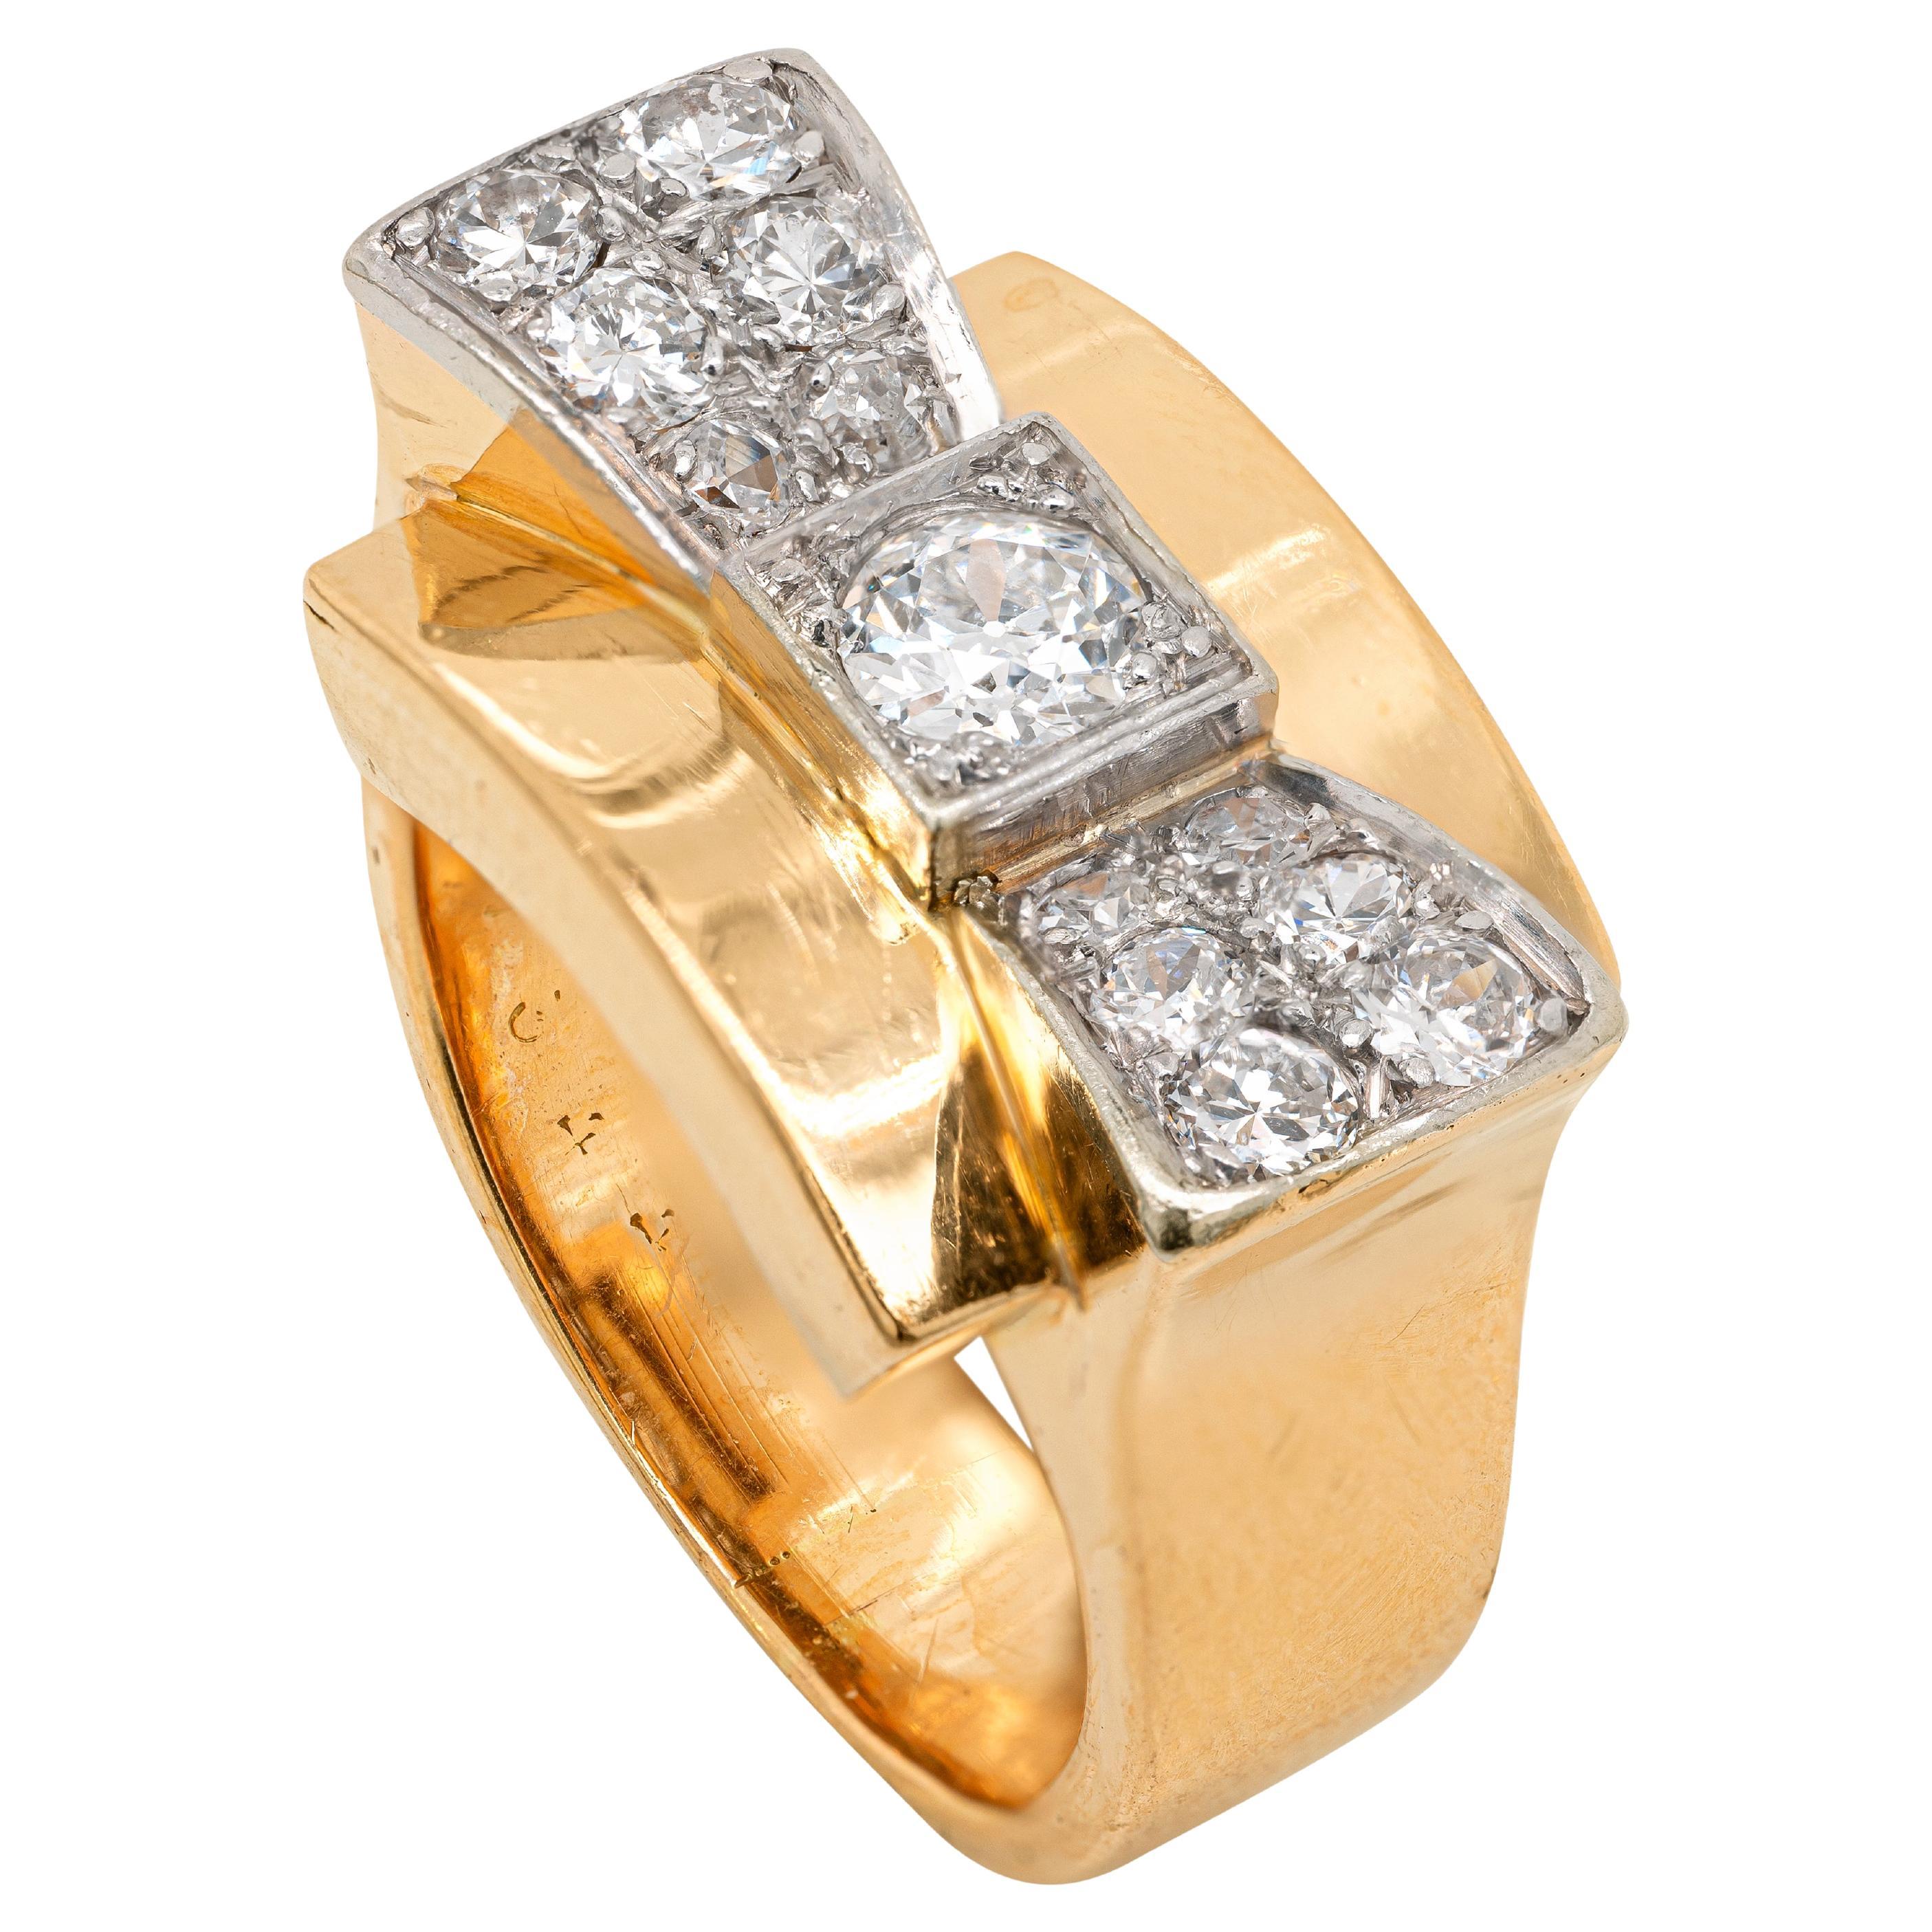 This vintage cocktail ring features a gorgeous bow tie in the centre, beautifully inlaid with 13 transitional cut diamonds weighing approximately 0.70ct in total, all mounted in platinum. The wonderful bow tie sits atop a solid yellow gold curved